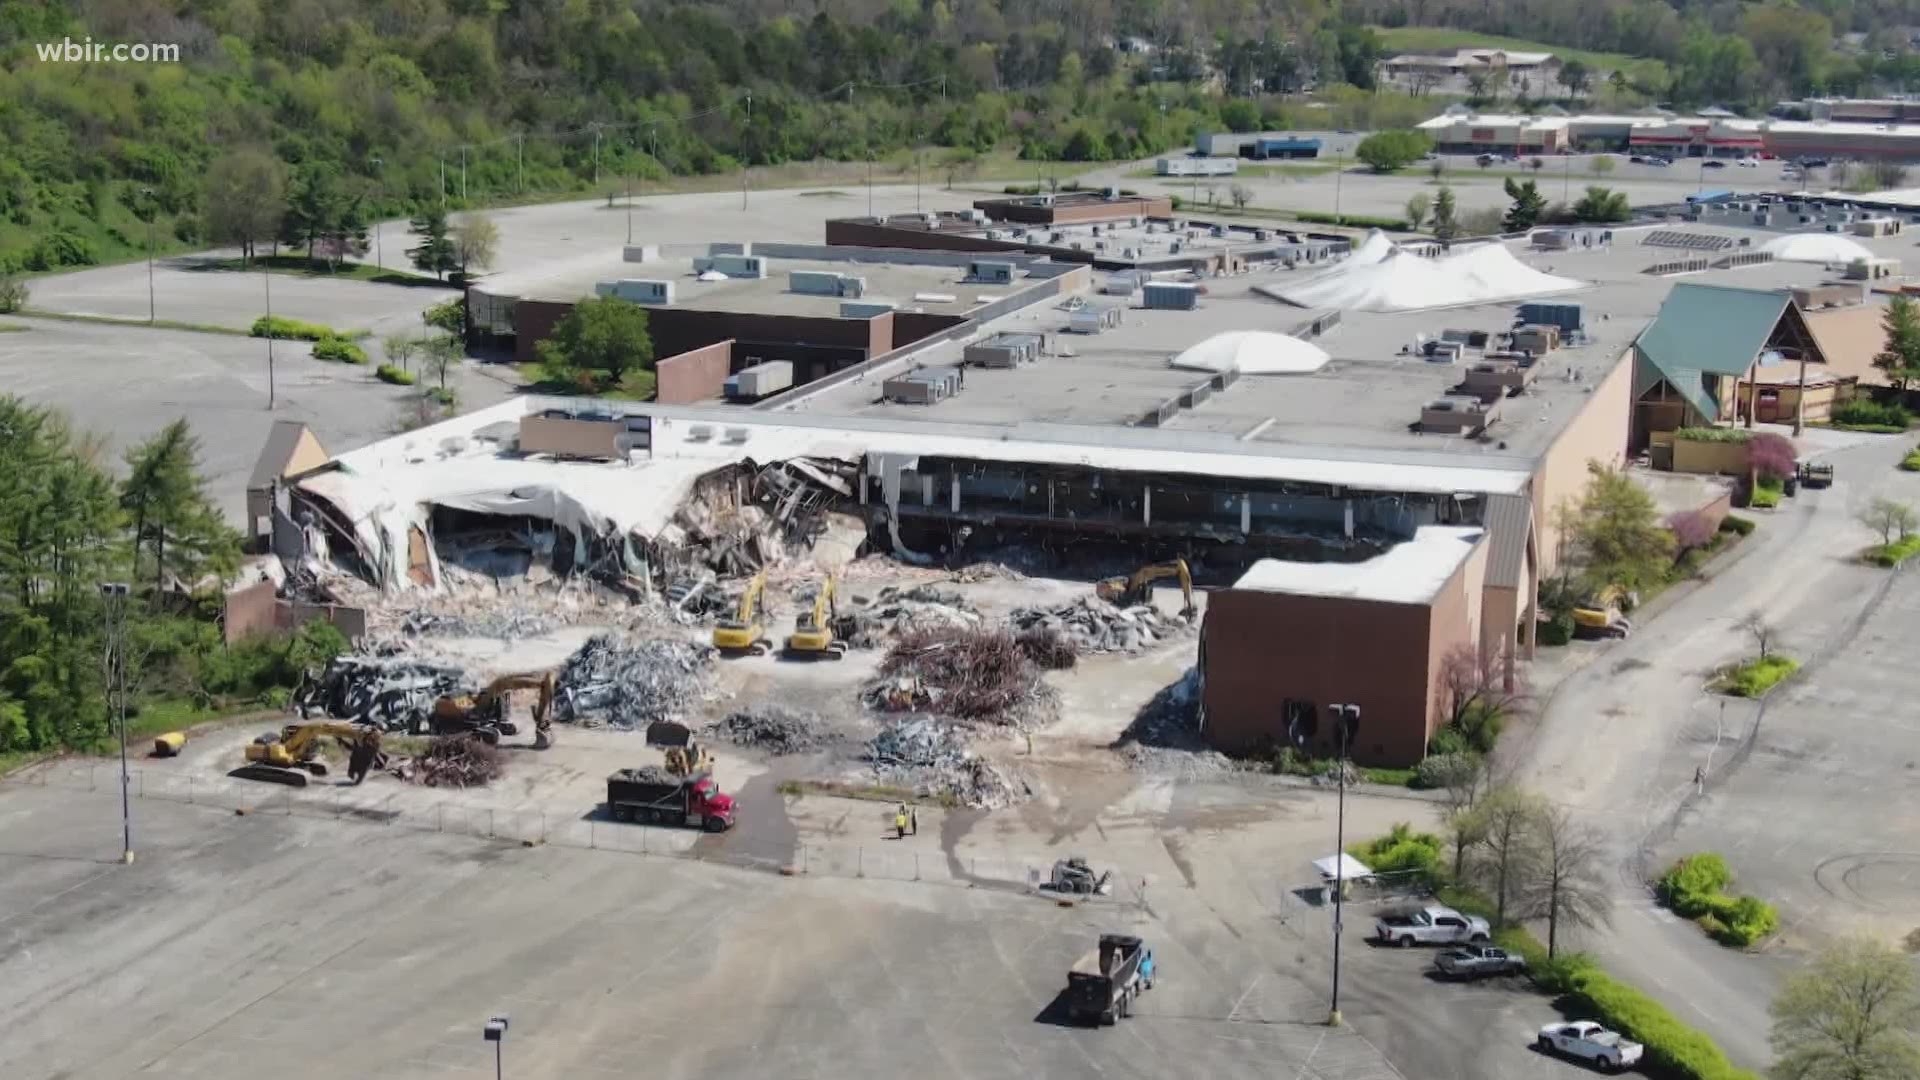 Demolition is underway on the former Knoxville Center Mall, set to be a new Amazon delivery station.